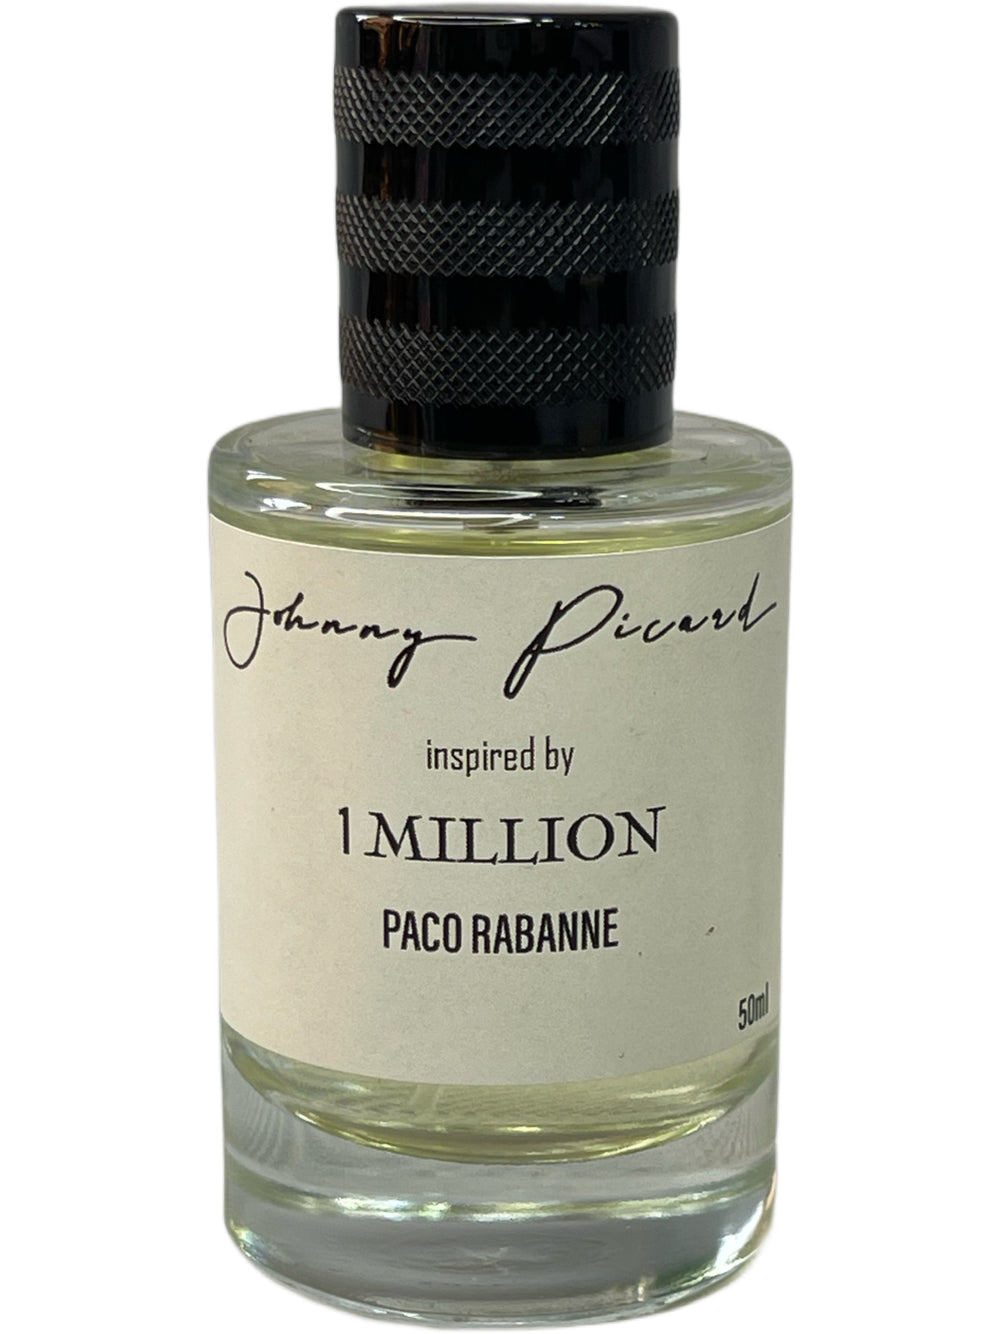 Johnny picard inspired by 1 million PACO RABANNE